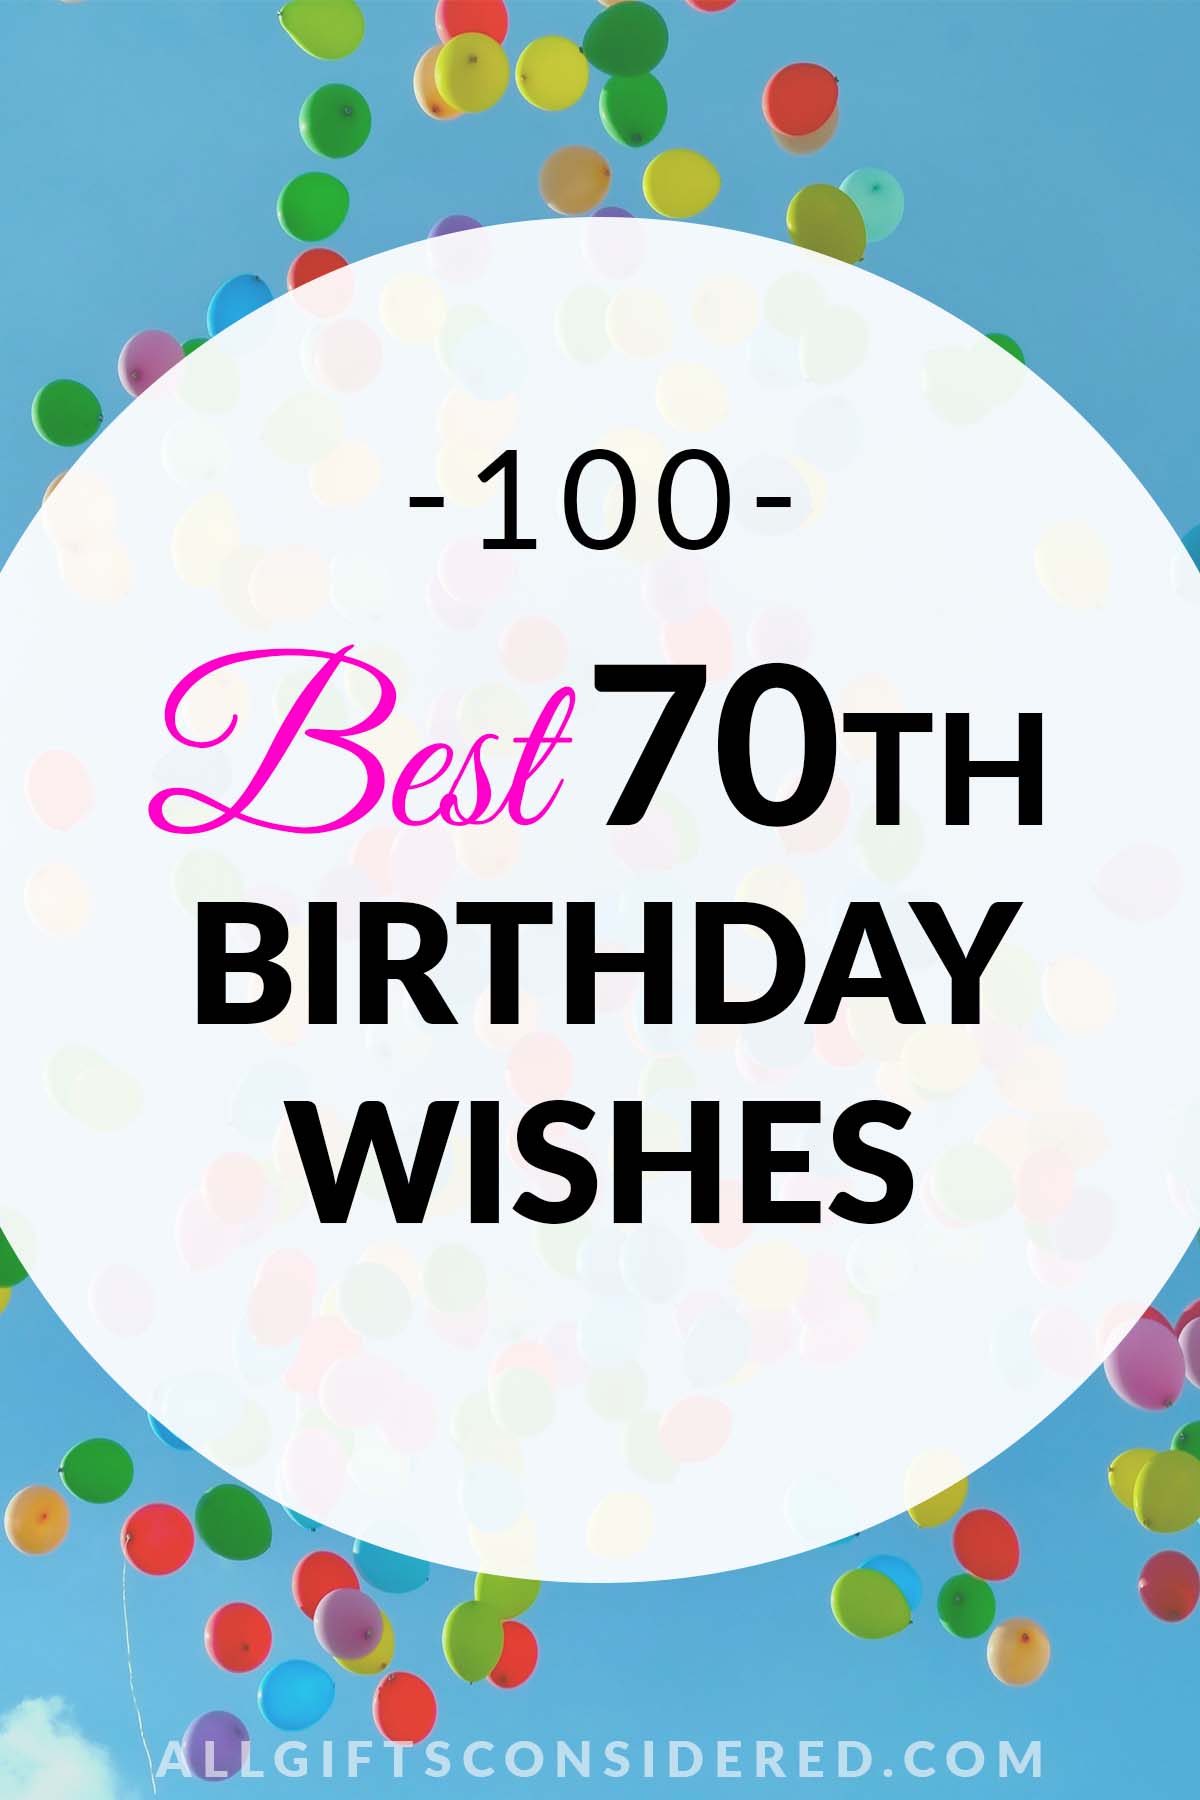 100 Best 70th Birthday Wishes » All Gifts Considered